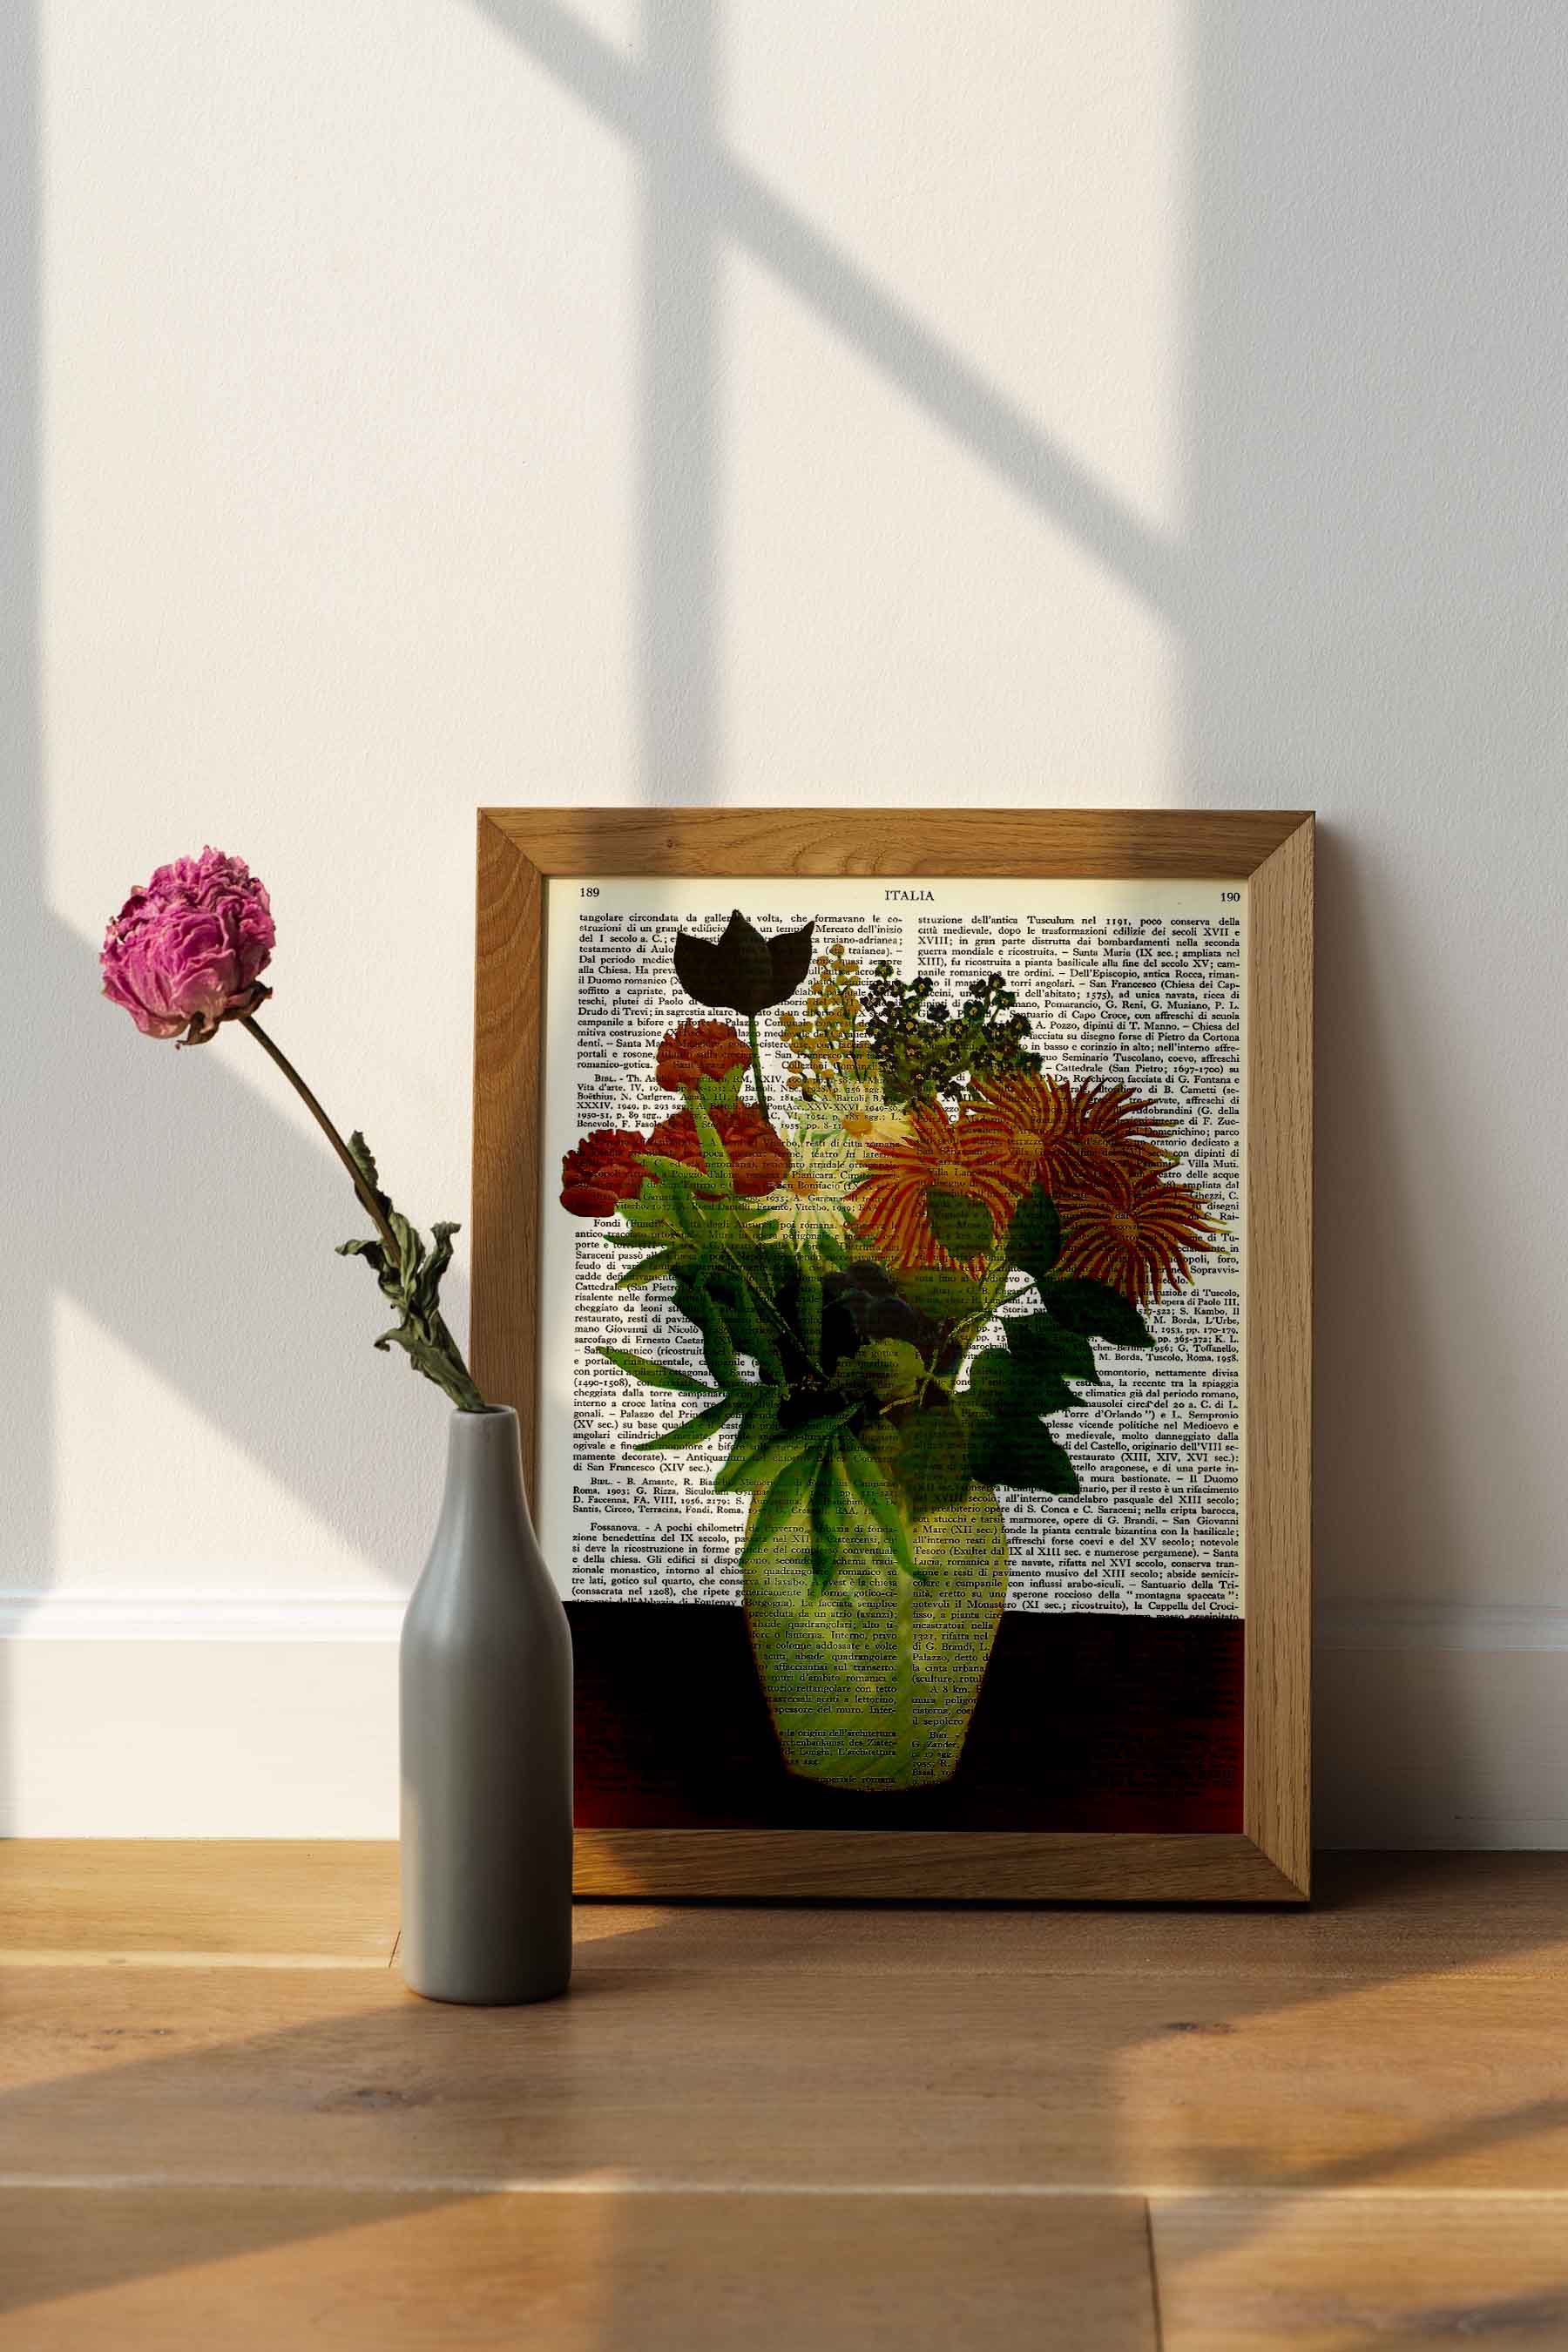 Mix-up: Bouquet of Flowers with China Asters and Tokyos - Henri Rousseau